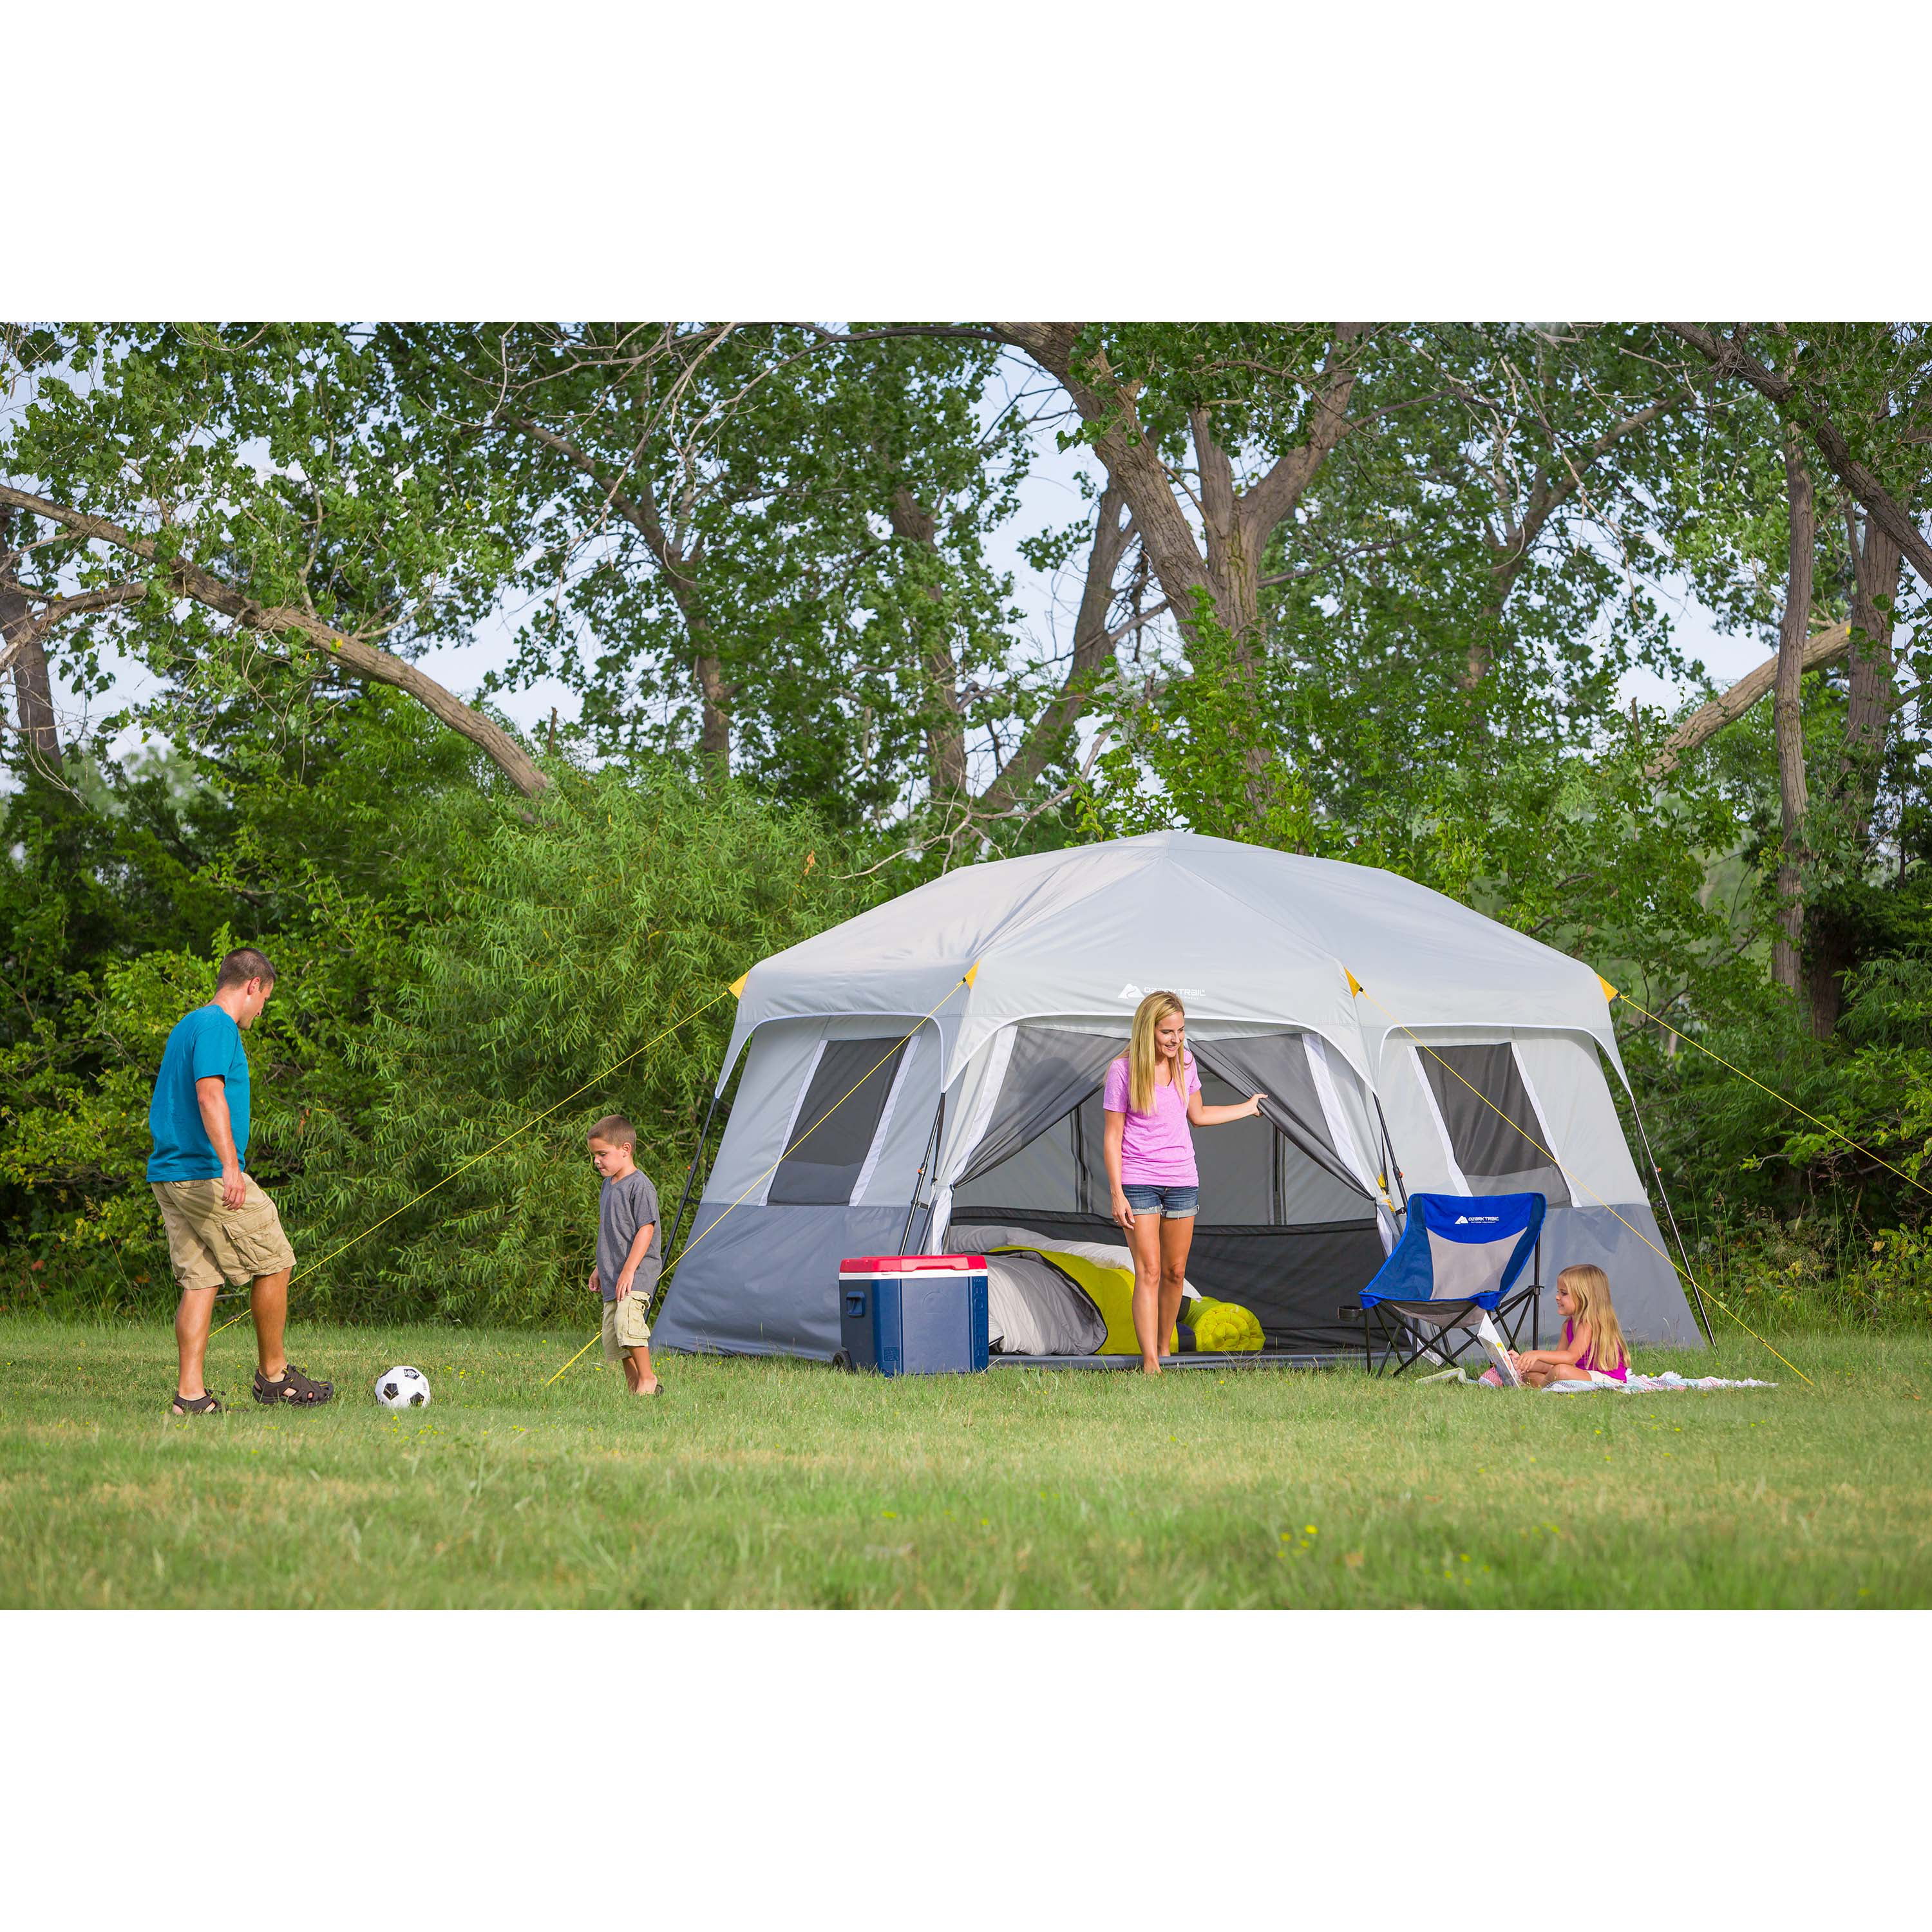 TENT 8-Person Instant Hexagon Cabin Ozark Trail Easy Setup CAMPING Family NEW! 